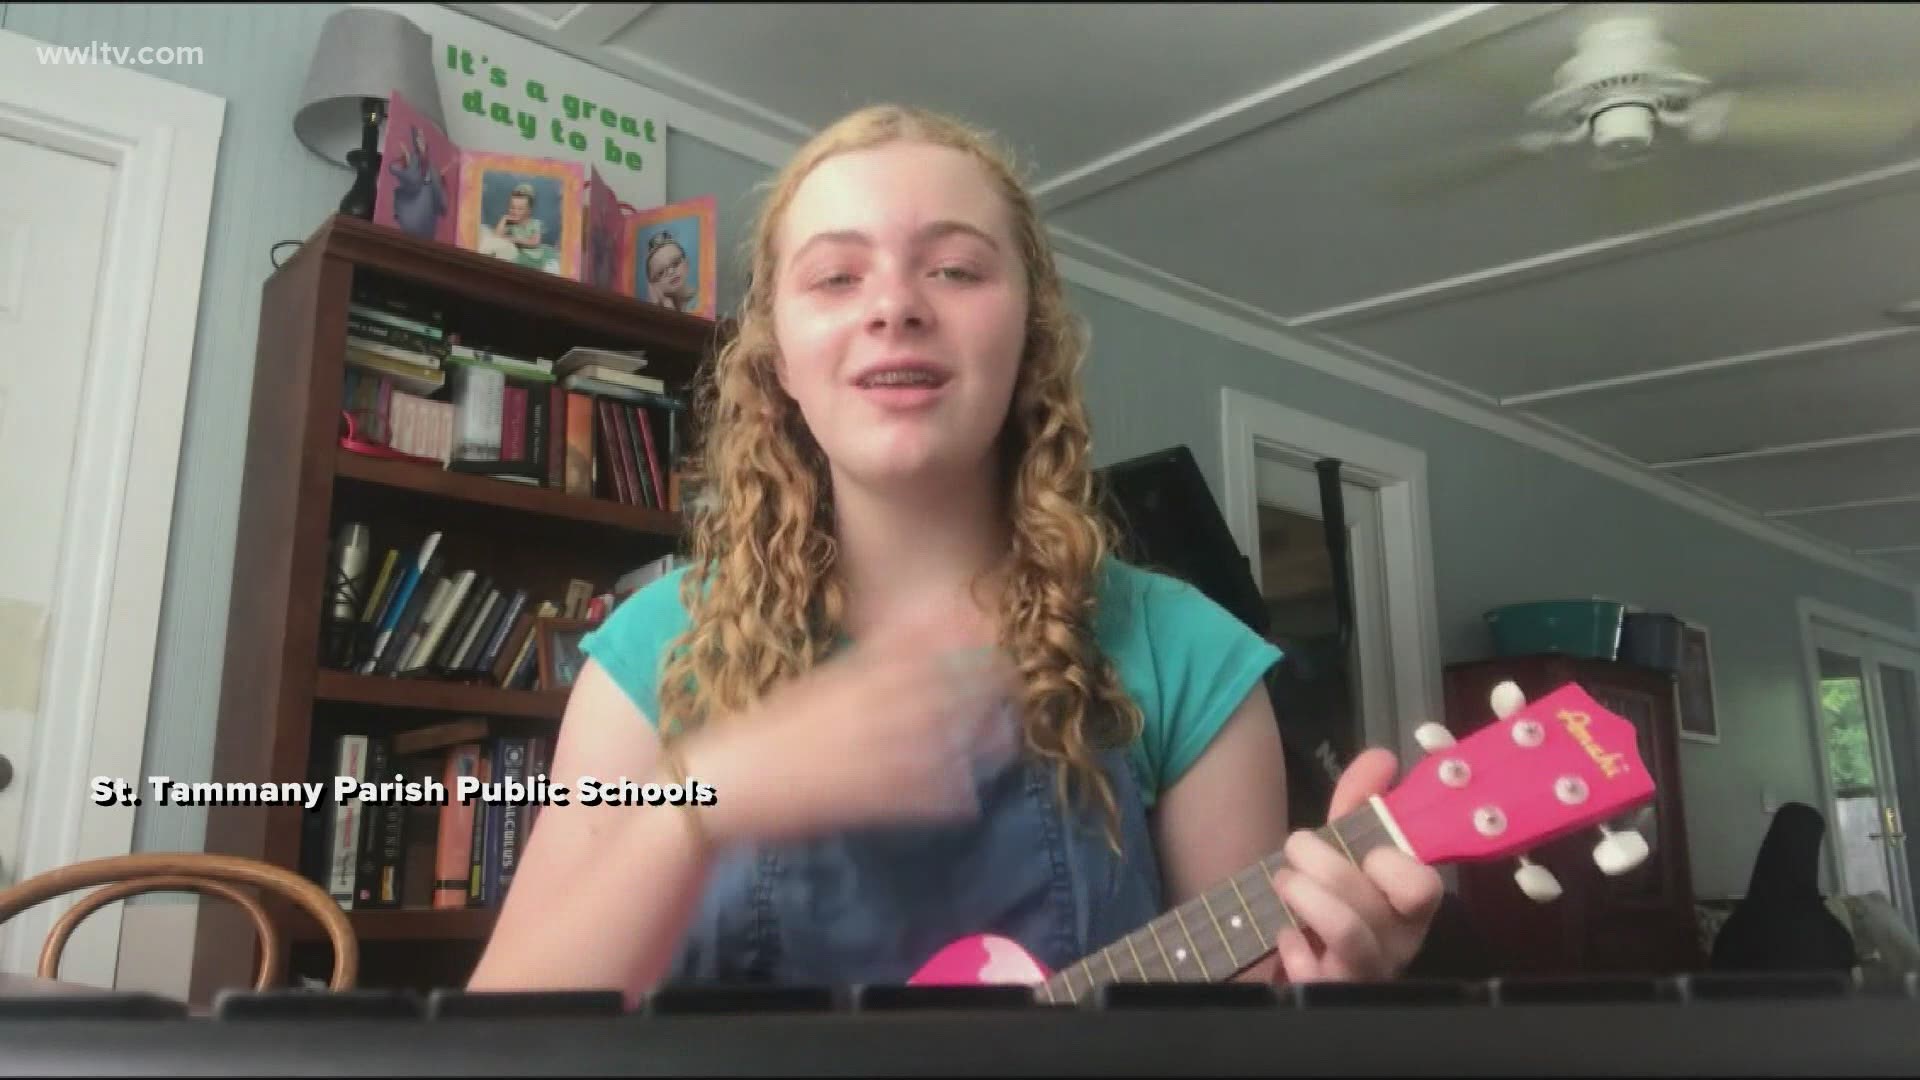 Singing since she was two, 15-year-old Emma St. Cyr has always loved music. Recently she turned her passion into a gift for someone.